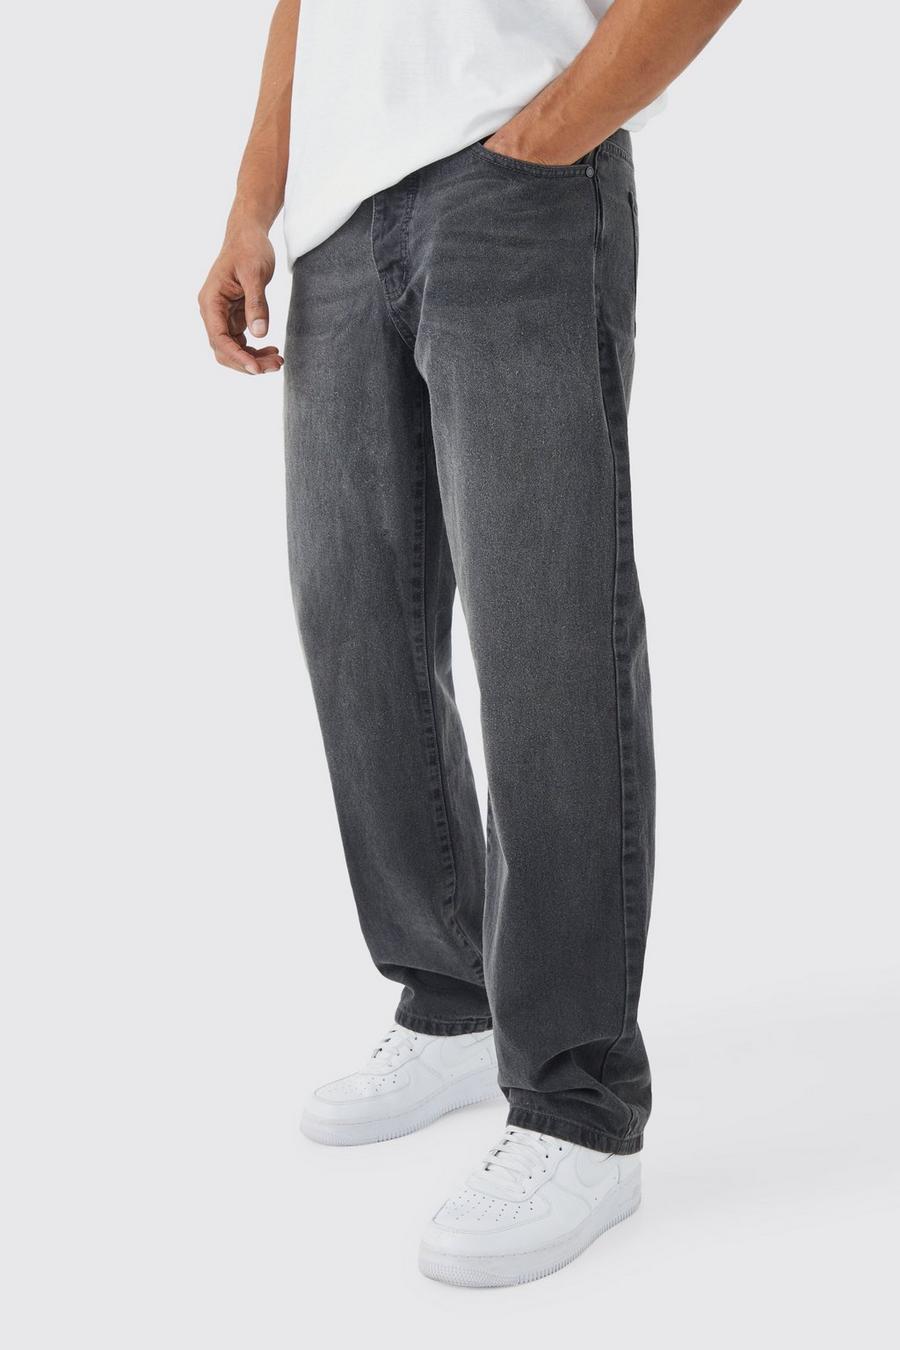 Charcoal gris Relaxed Fit Jeans